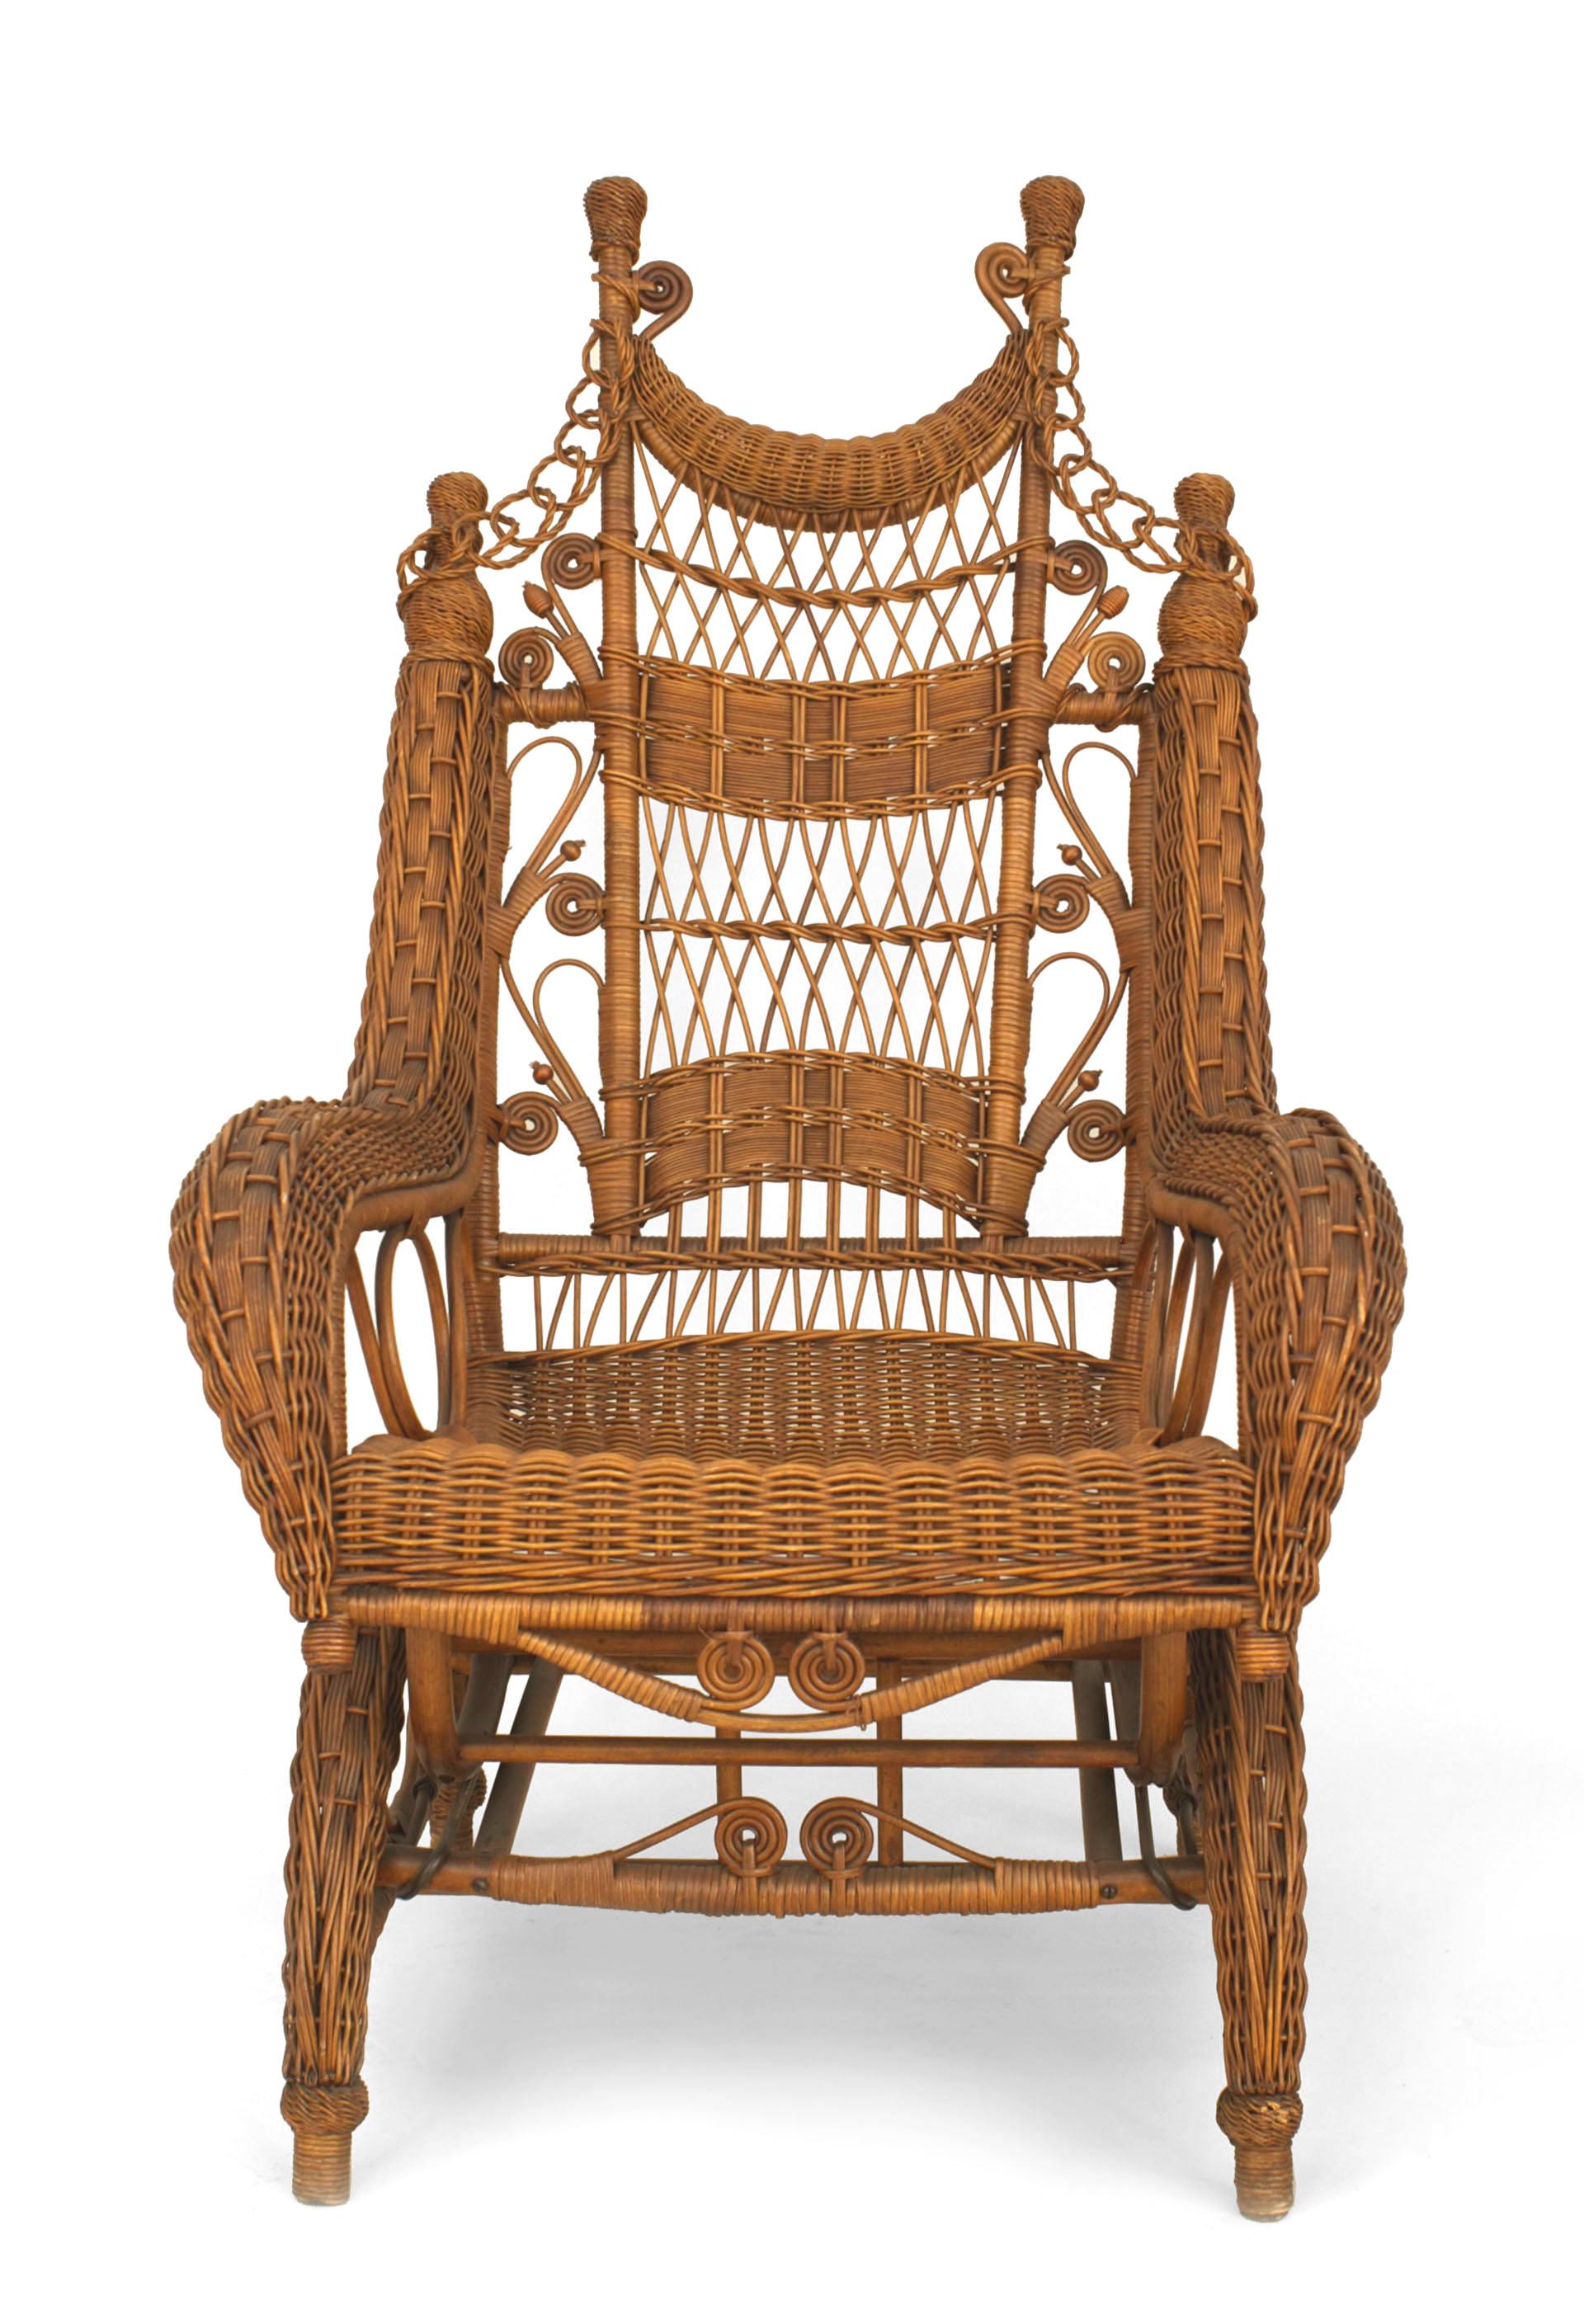 American Victorian natural wicker ornate high back platform rocking chair with woven rolled arms and finials on back (HEYWOOD BROS.)
